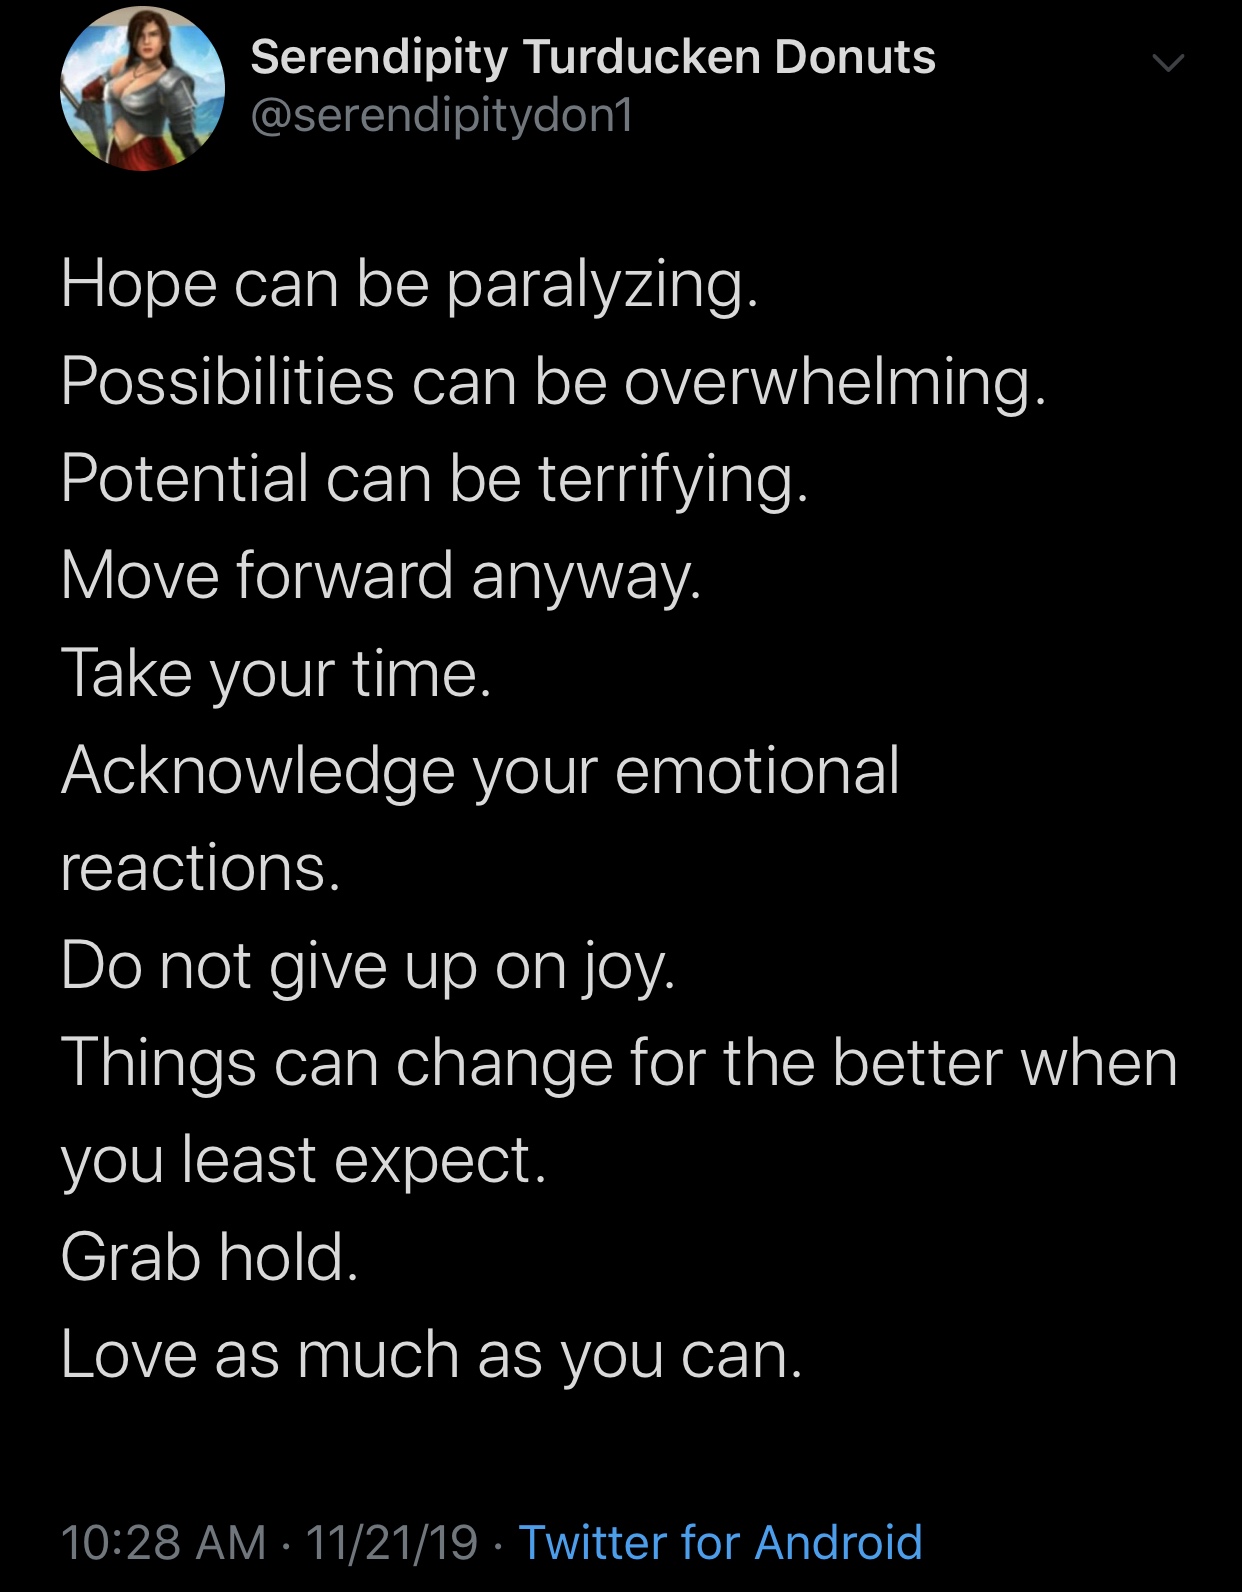 wholesome meme - atmosphere - Serendipity Turducken Donuts Hope can be paralyzing. Possibilities can be overwhelming. Potential can be terrifying. Move forward anyway. Take your time. Acknowledge your emotional reactions. Do not give up on joy. Things can